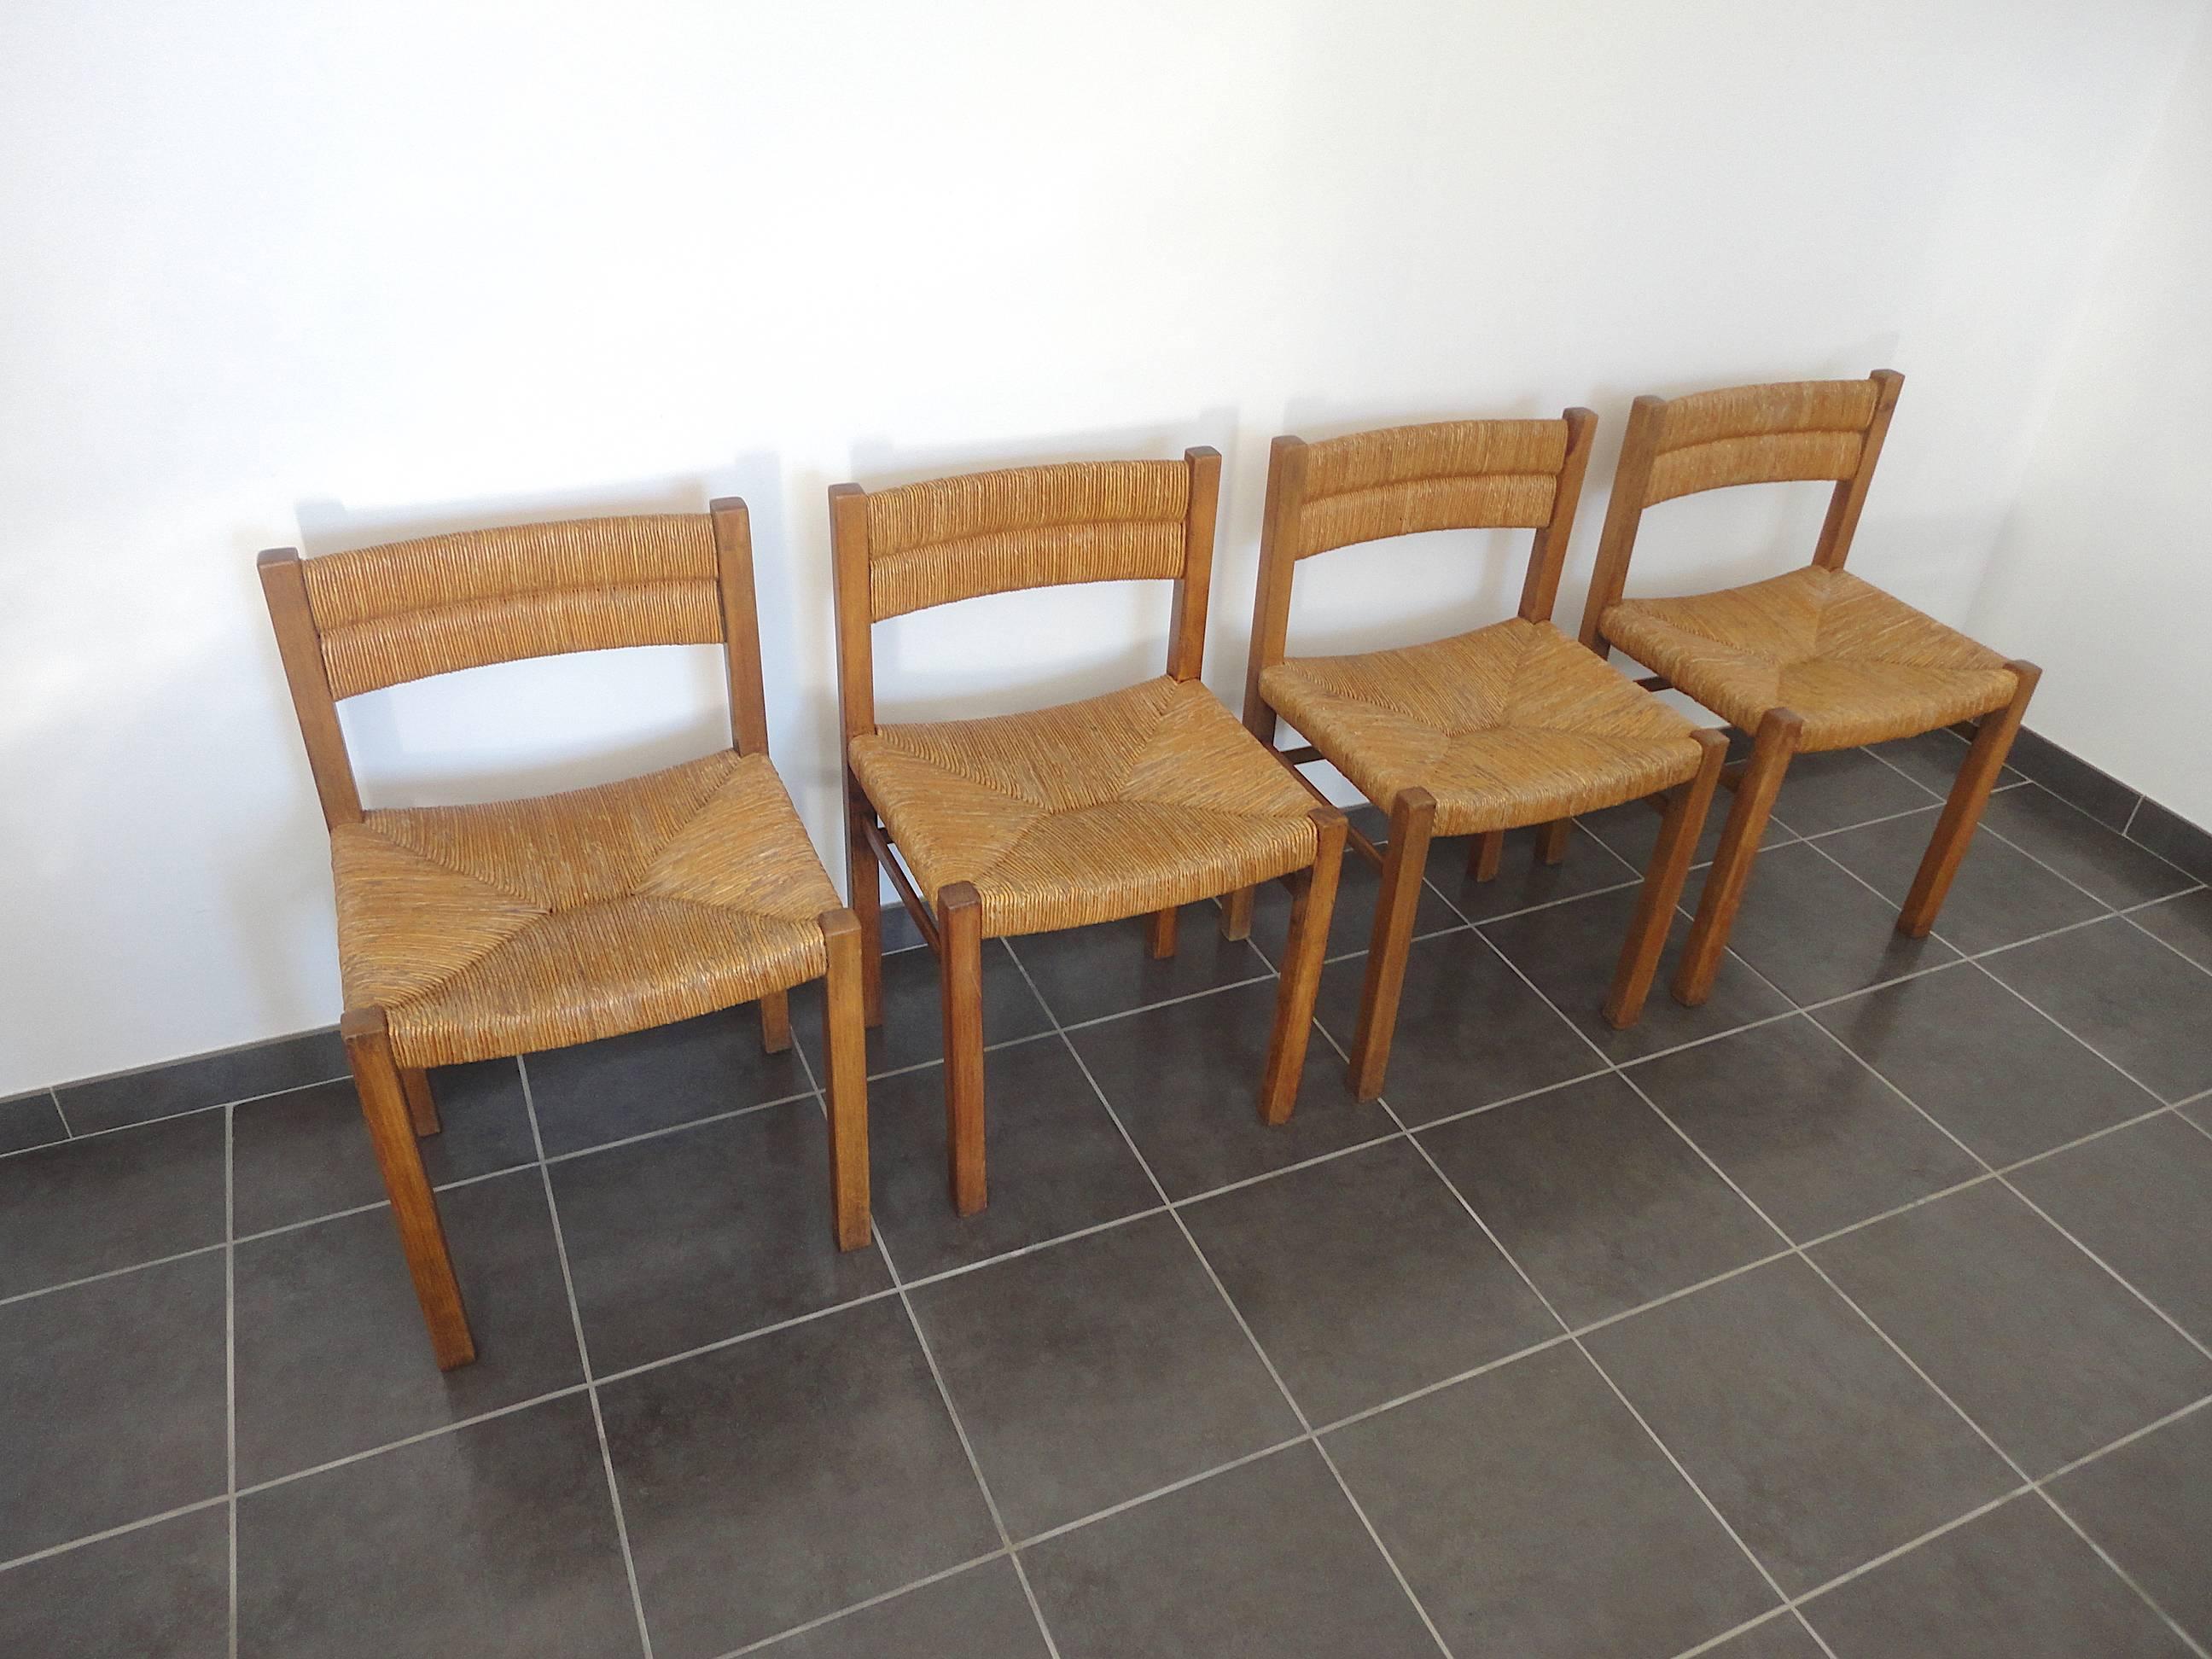 Fully original set of four dining chairs by Pierre Gautier-Delaye, designed in 1954. This early edition set was produced by French manufacturer Meubles Weekend. Made from wood and rush.
Pierre Gautier Delaye was awarded the Rene Gabriel Prize in